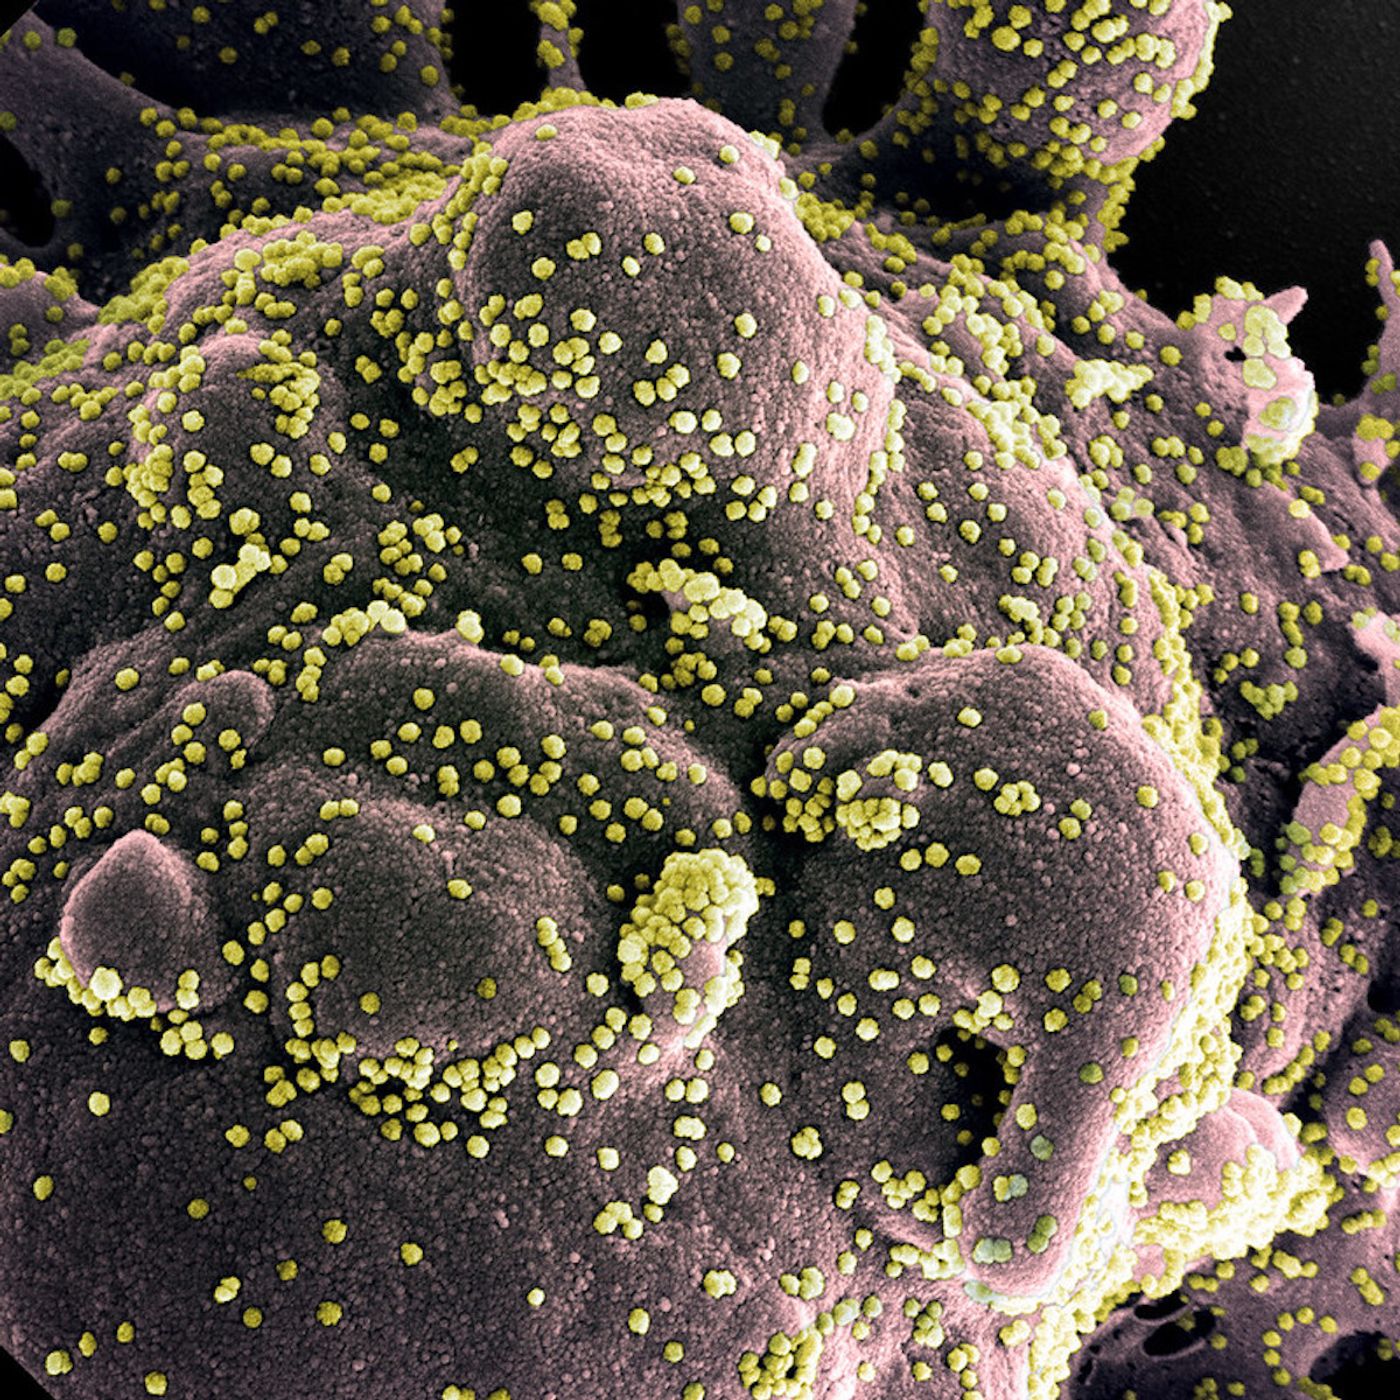 Colorized scanning electron micrograph of an apoptotic cell (gray) heavily infected with SARS-COV-2 virus particles (yellow), isolated from a patient sample. Image captured at the NIAID Integrated Research Facility (IRF) in Fort Detrick, Maryland. / Credit: NIAID